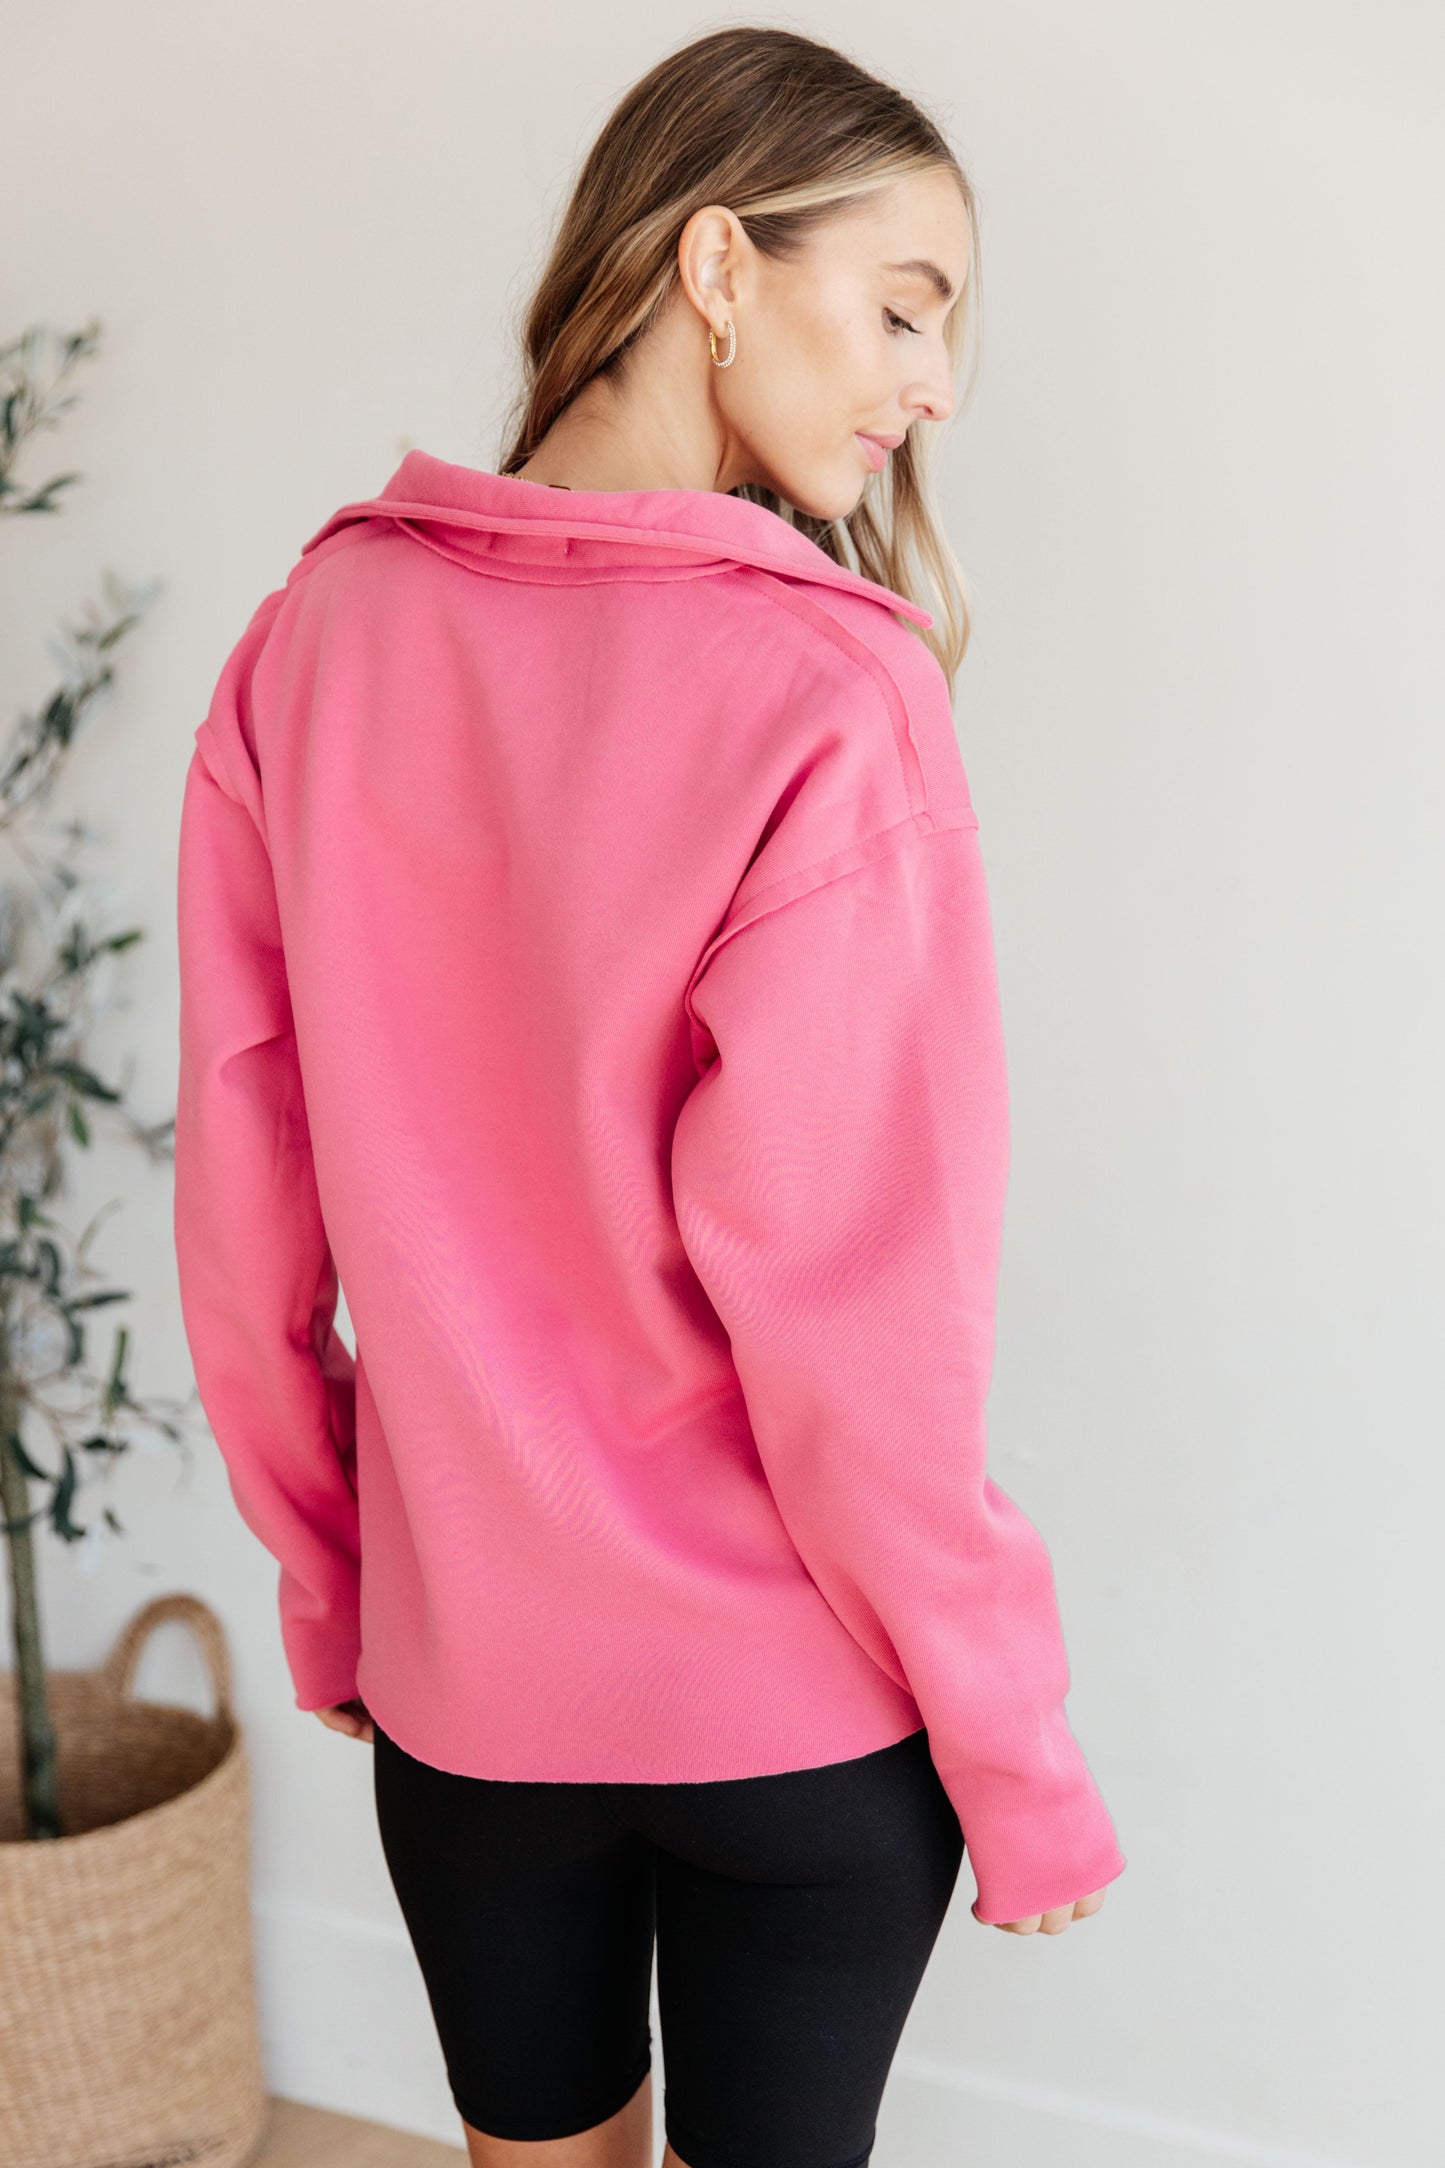 Same Ol' Situation Collared Pullover in Hot Pink